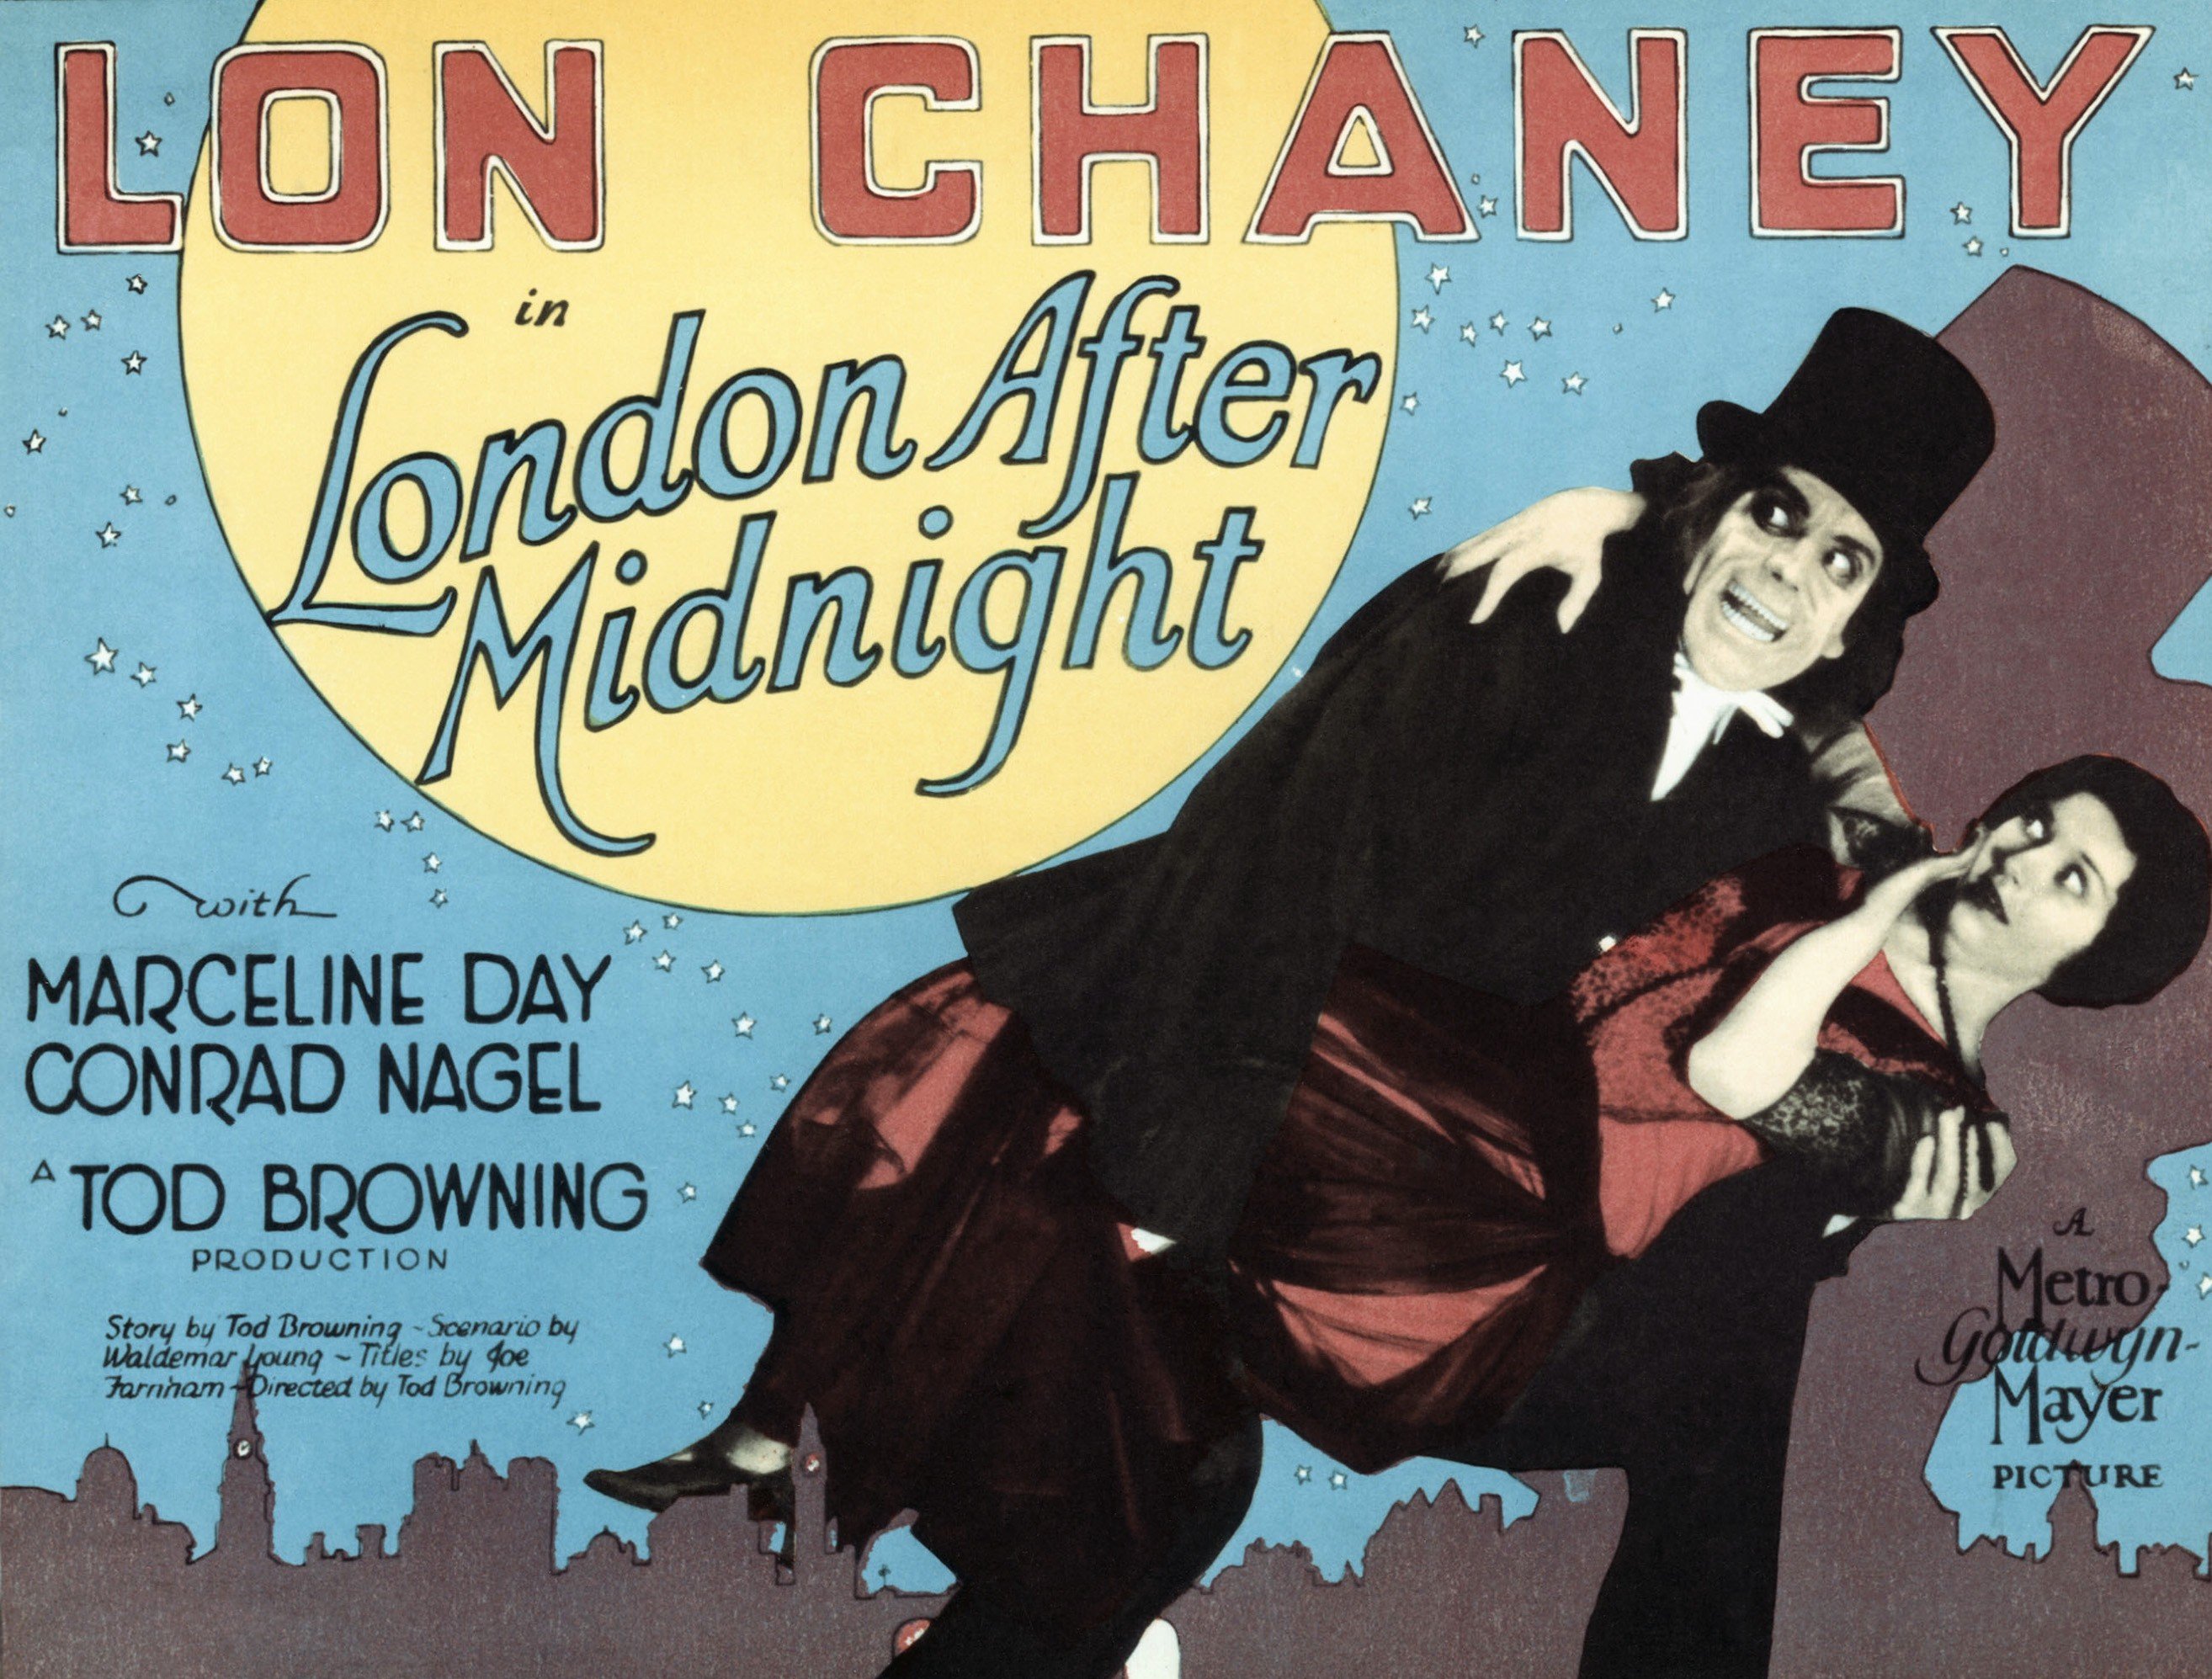 The Man With the Beaver Hat holding a woman on a lobby card for 'London After Midnight'